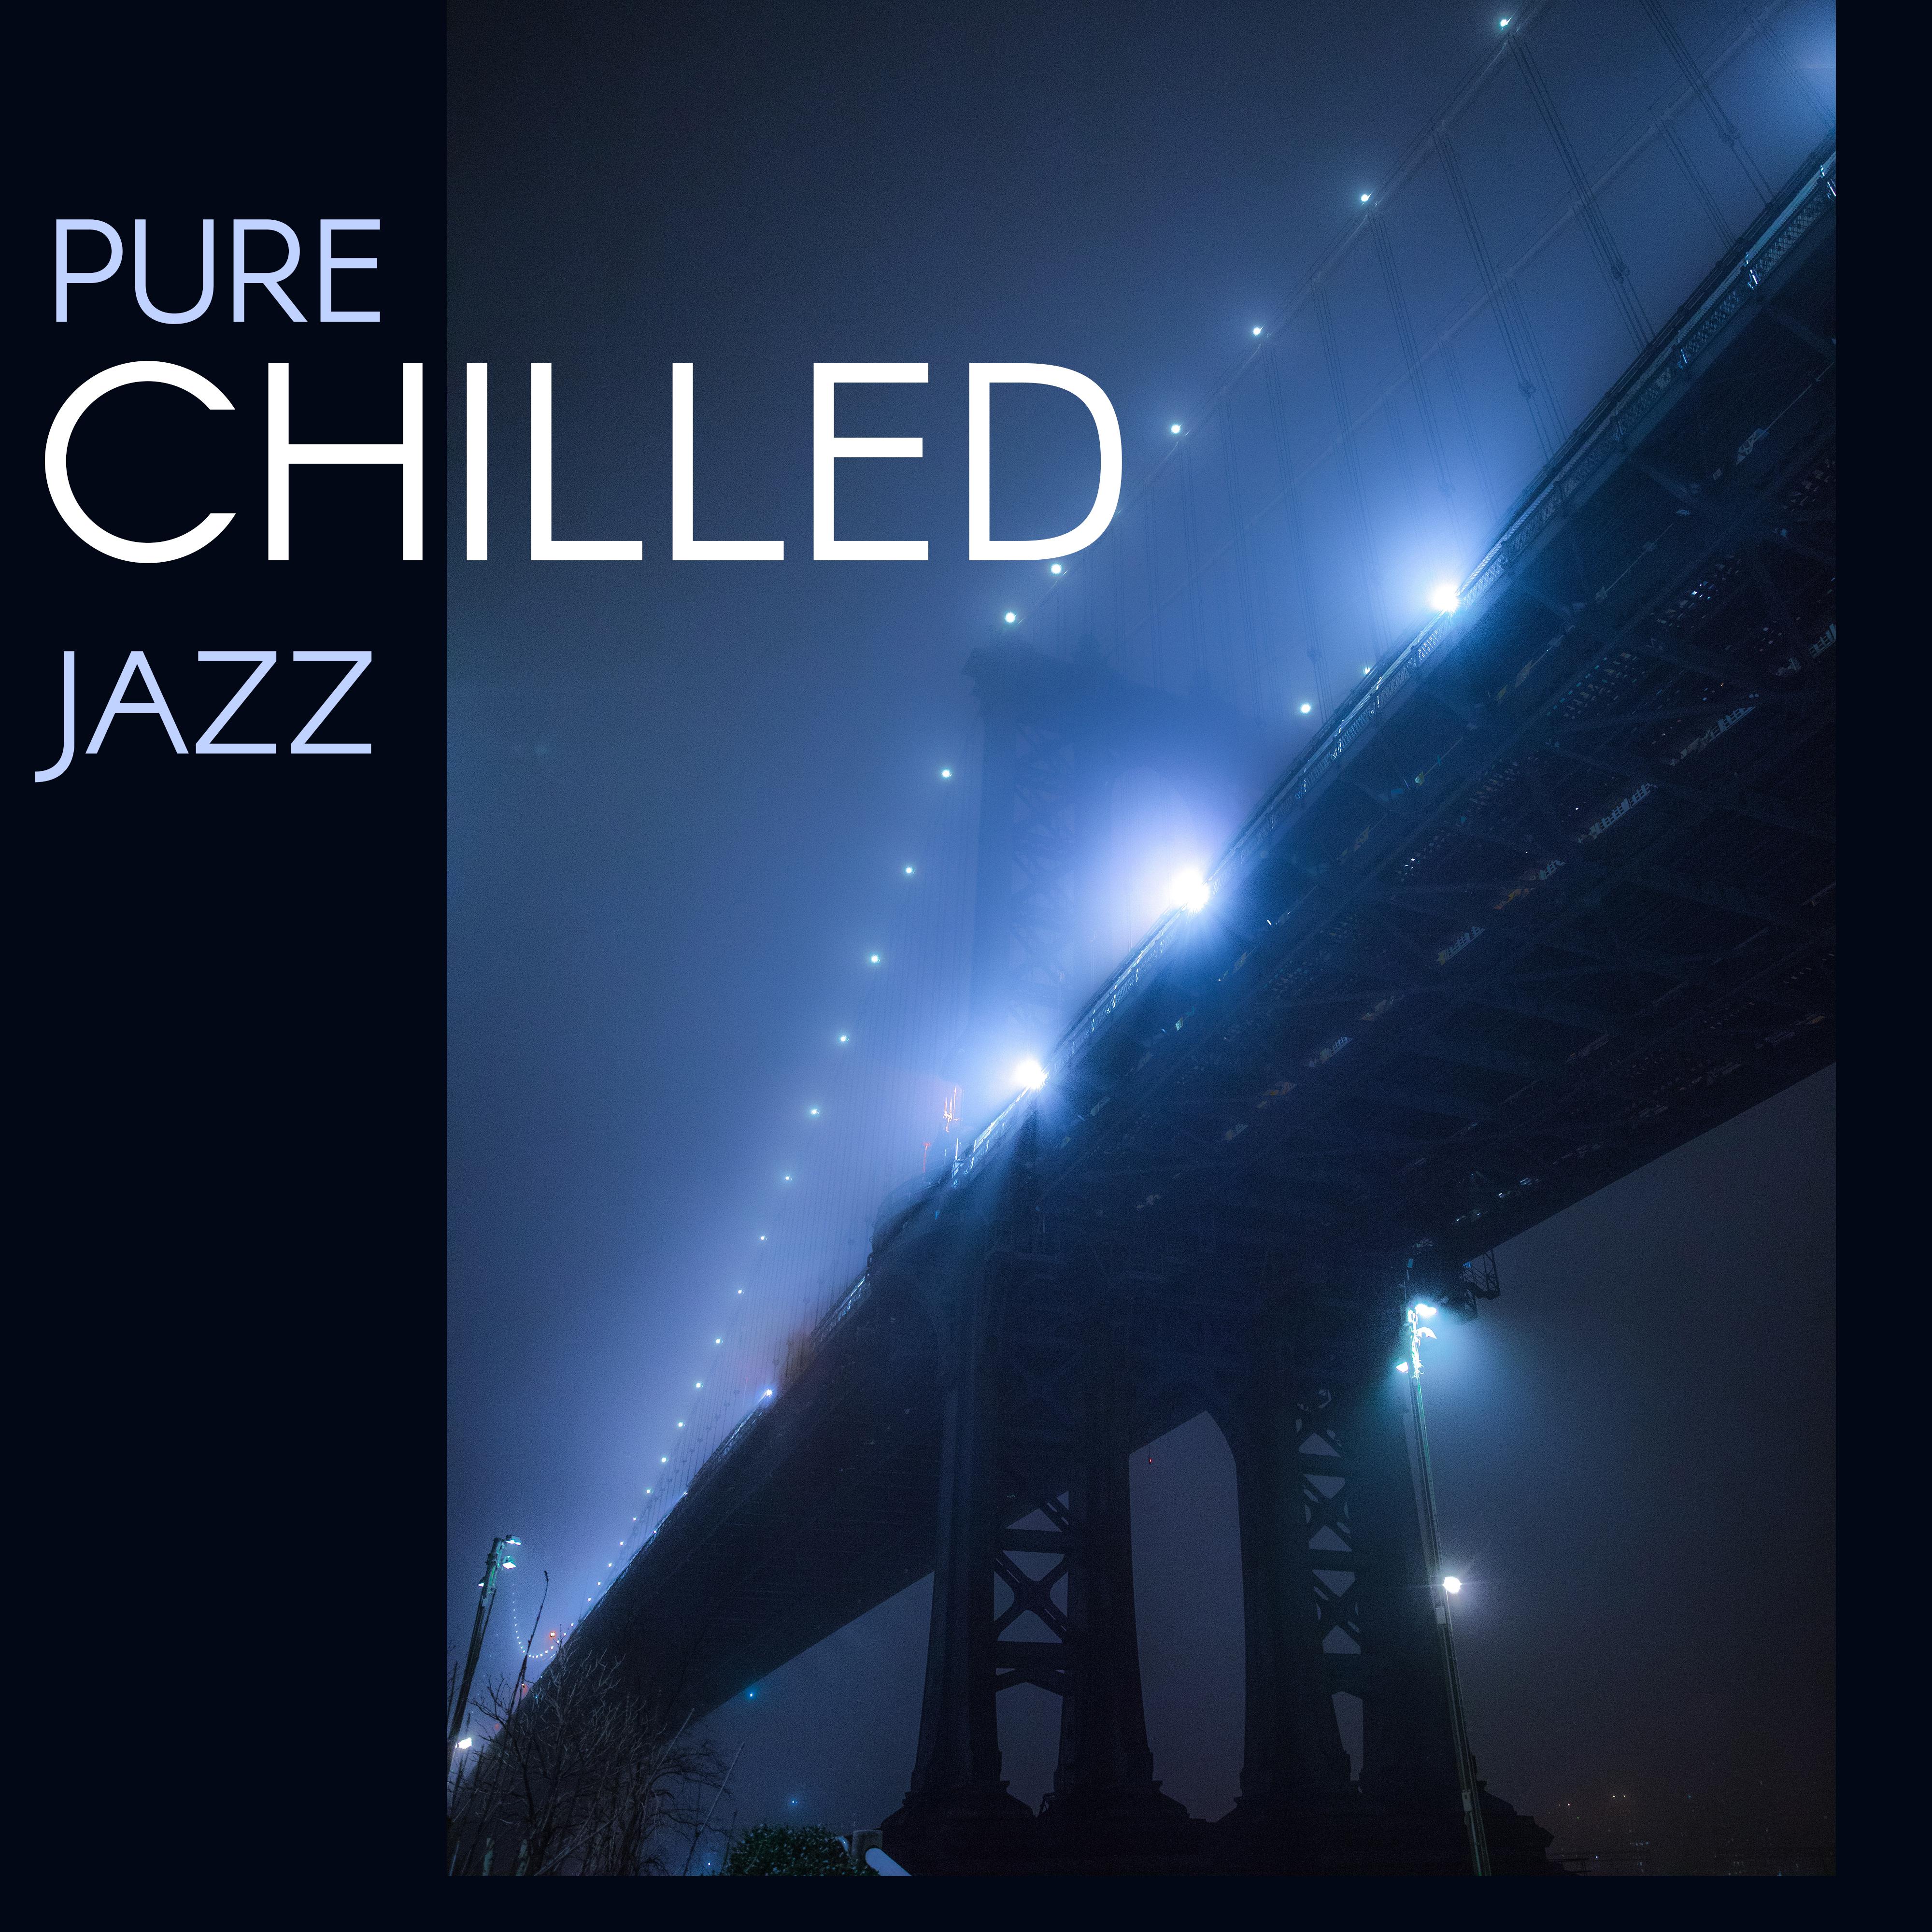 Pure Chilled Jazz